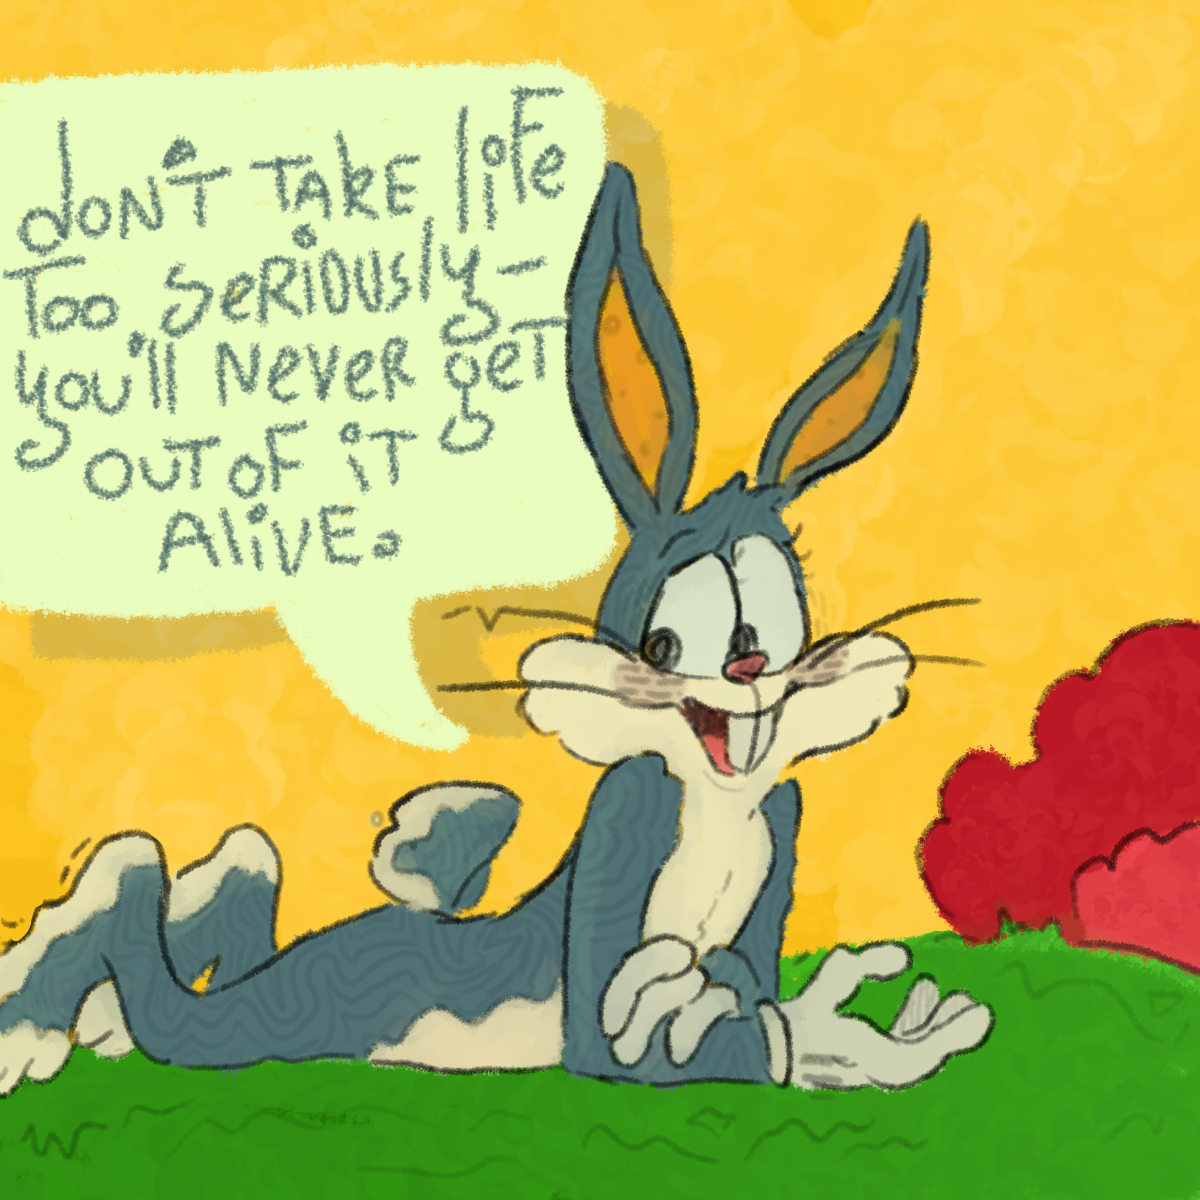 Via. my favorite quote from my favorite bunny. 